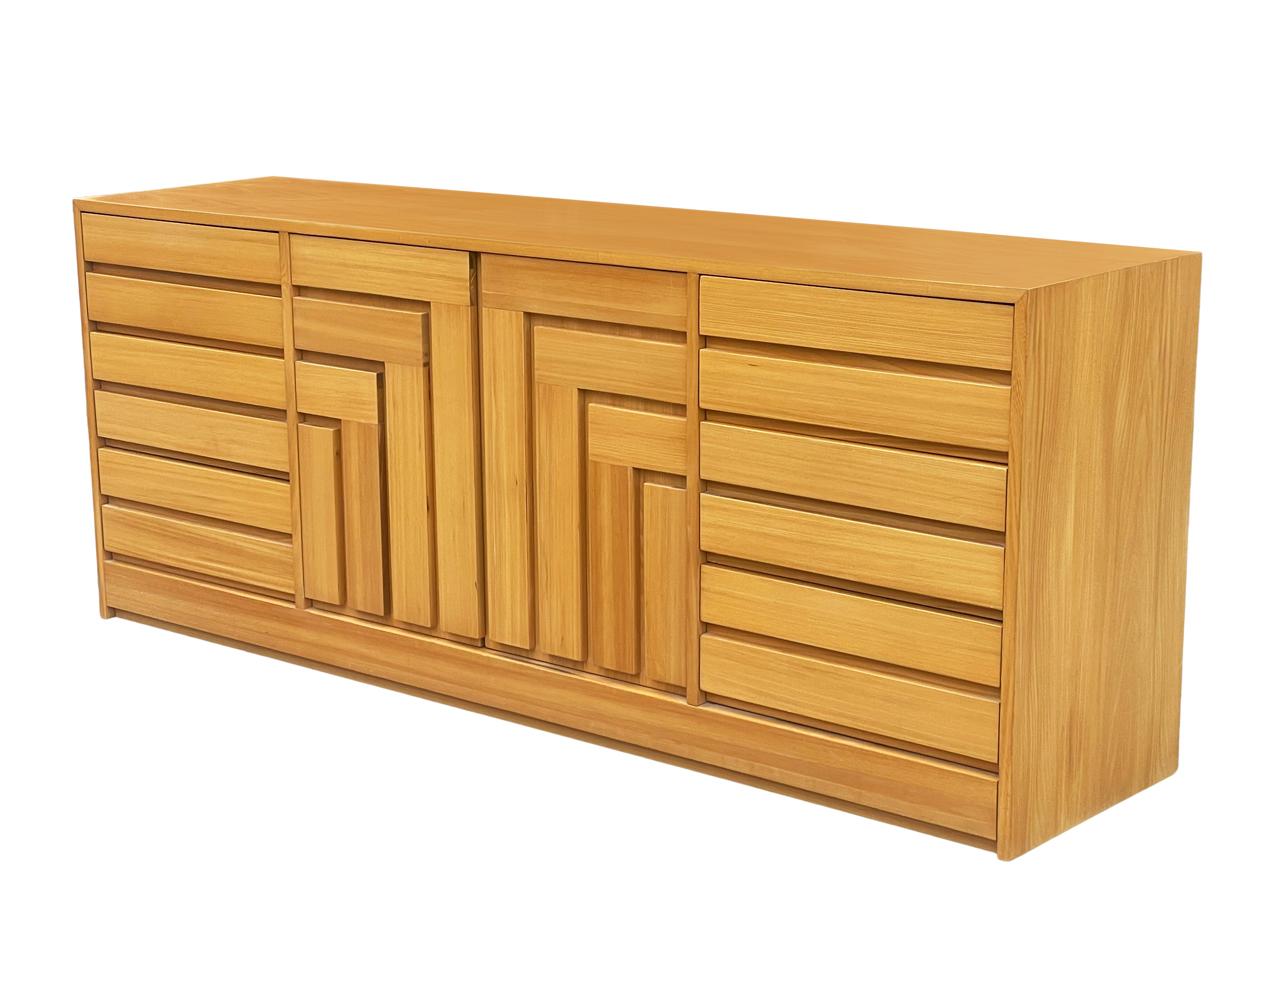 Late 20th Century Mid-Century Modern Geometric Front 9 Drawer Dresser or Credenza in Blonde Wood